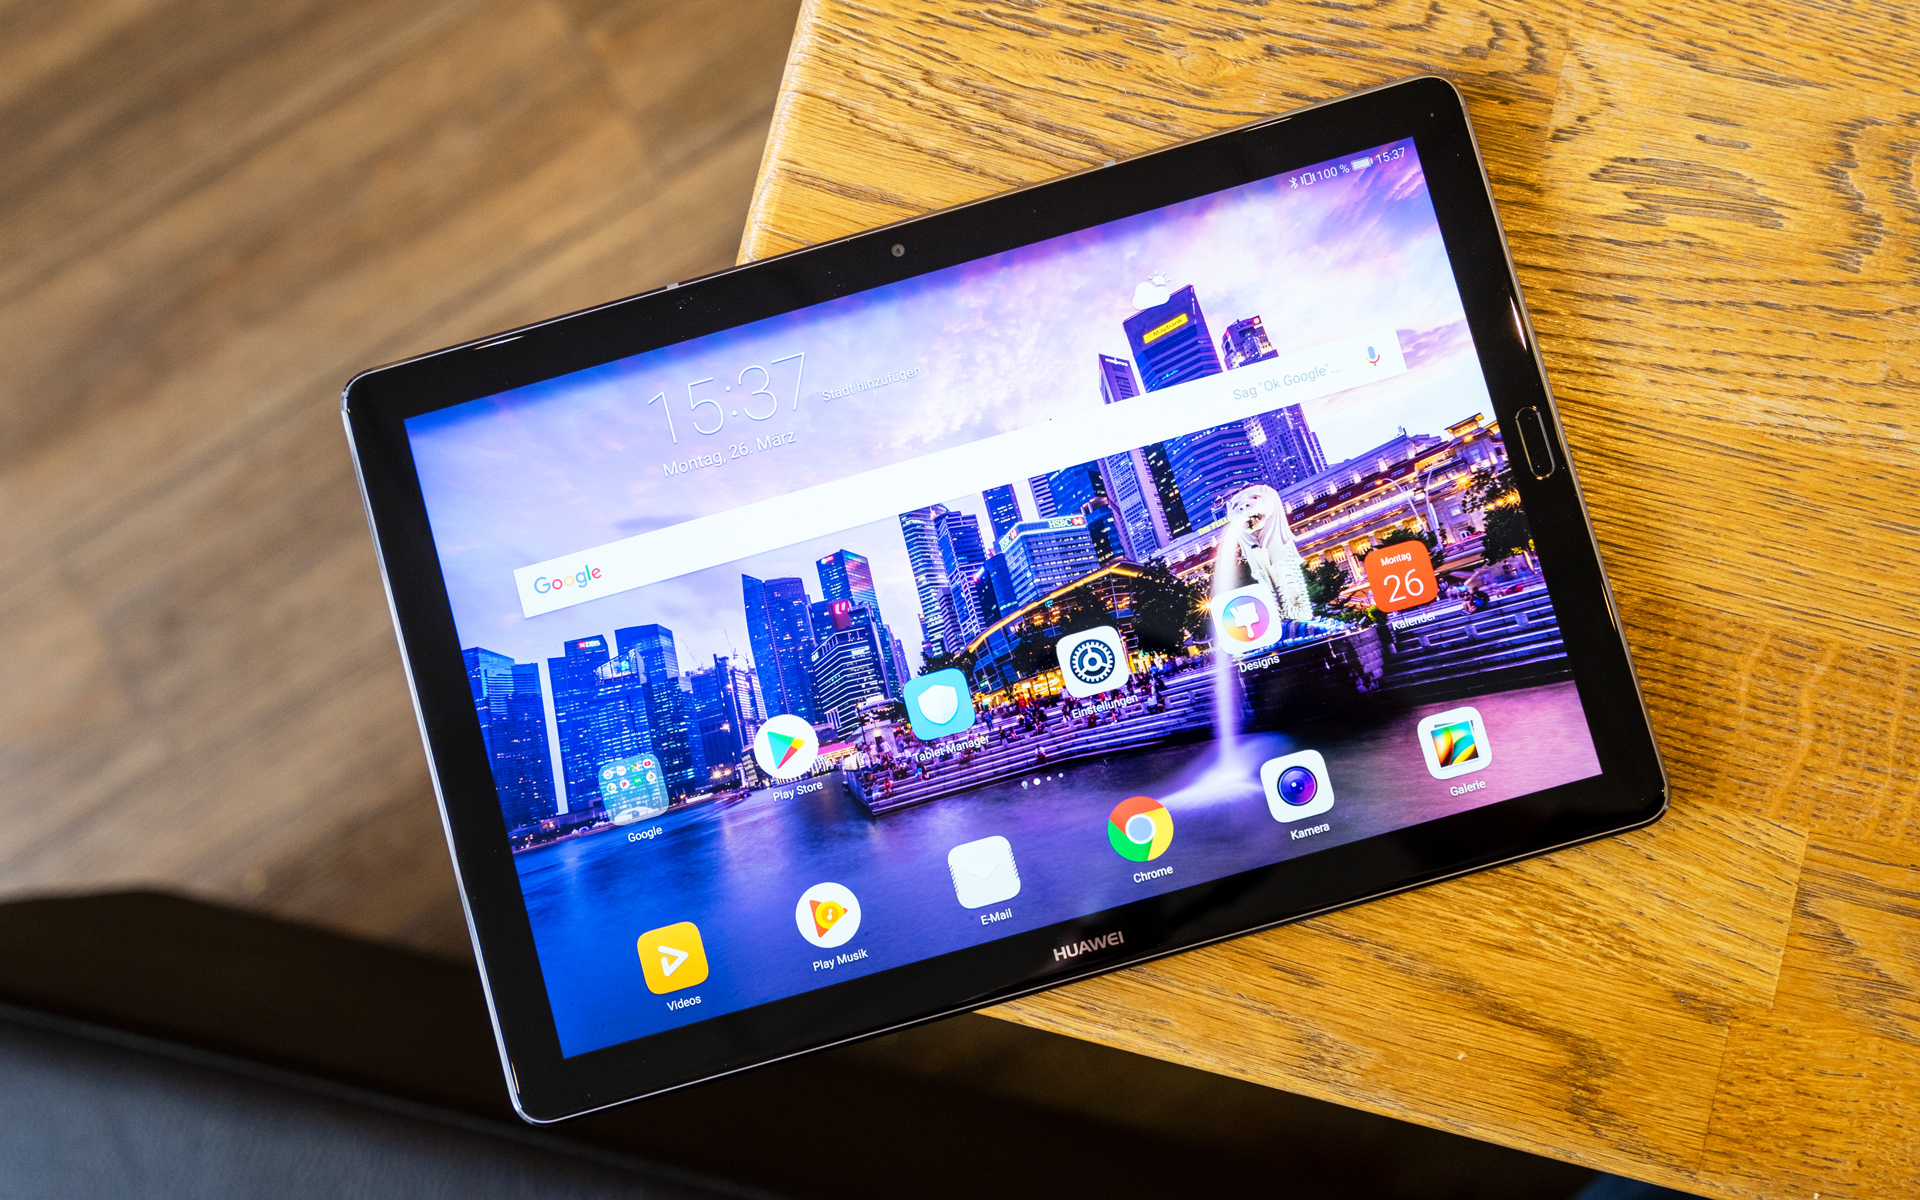 gall bladder Droop Cereal Huawei MediaPad M5 10 Review: A Perfect Android Tablet In 2018?